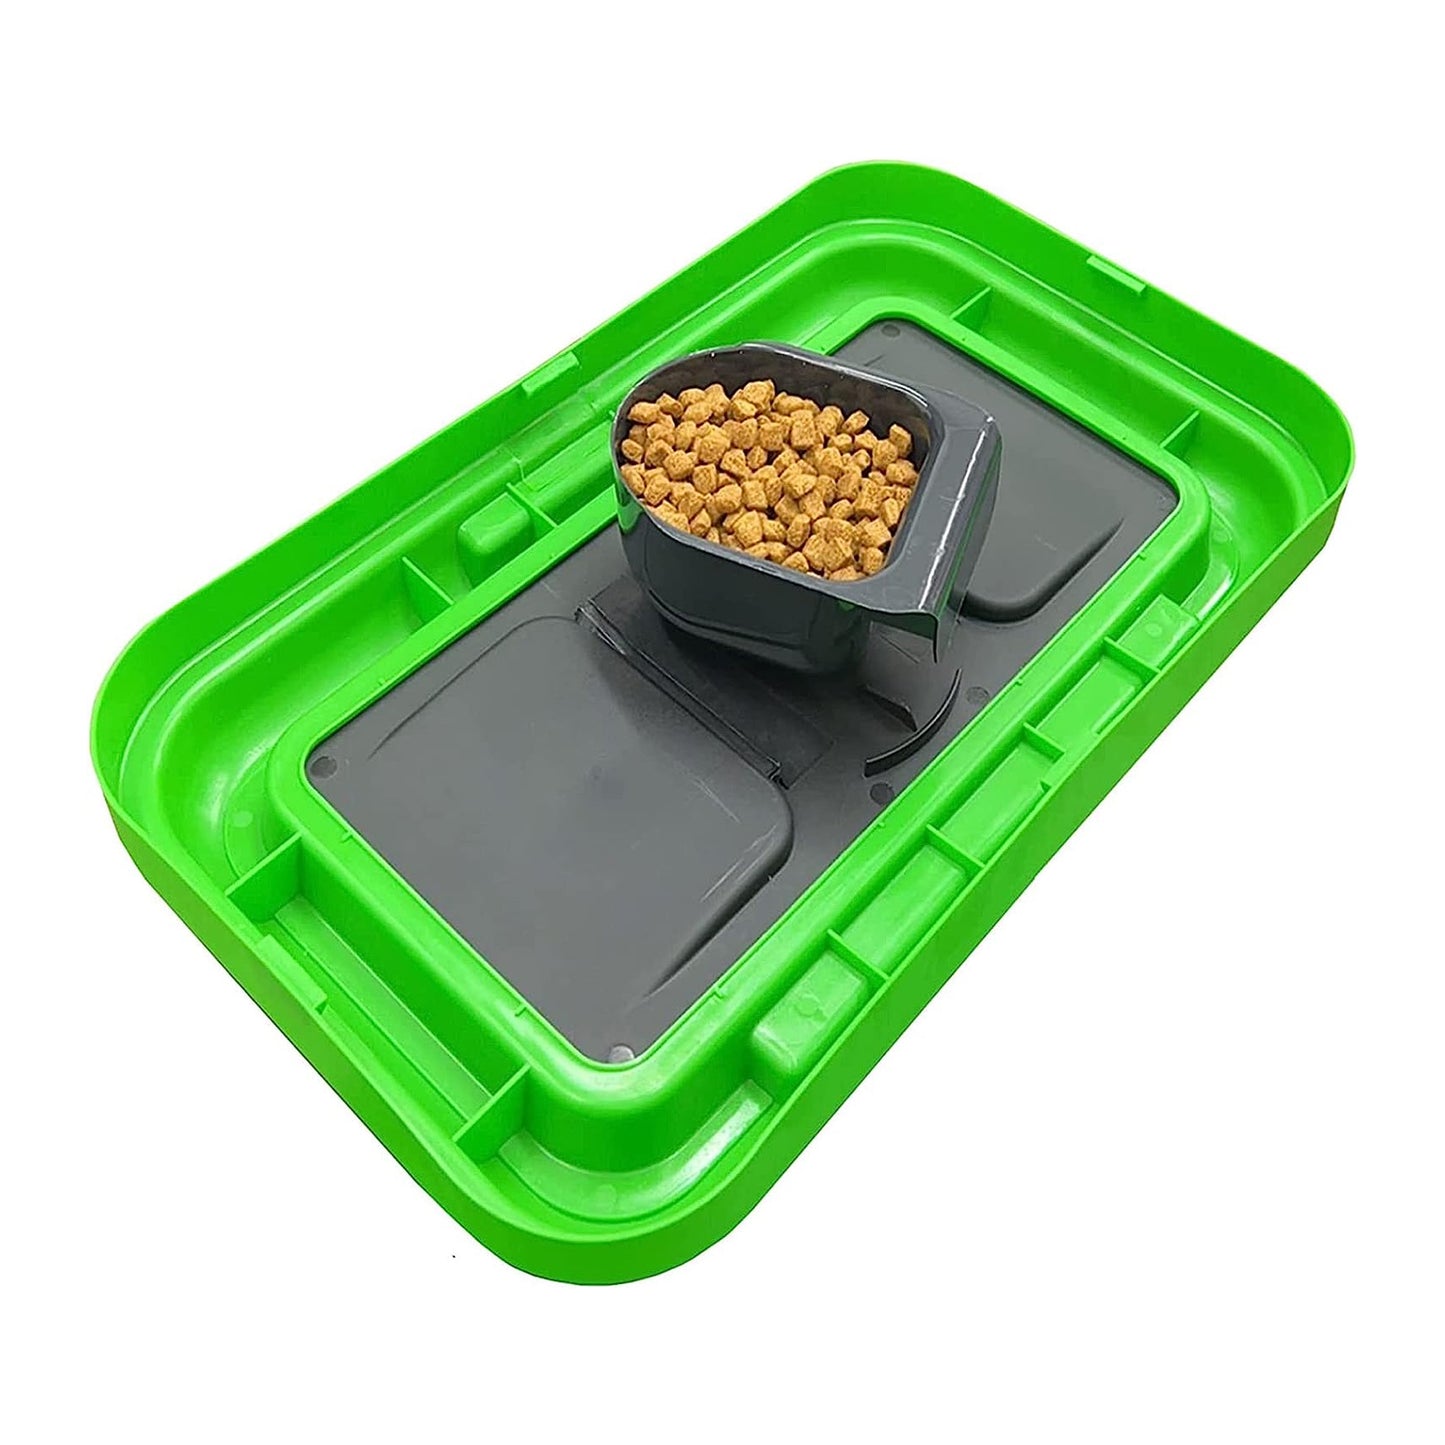 30 Litre Large Air Tight Seal Pet Food Container 15kg Animal Feed Holder With Food Scoop